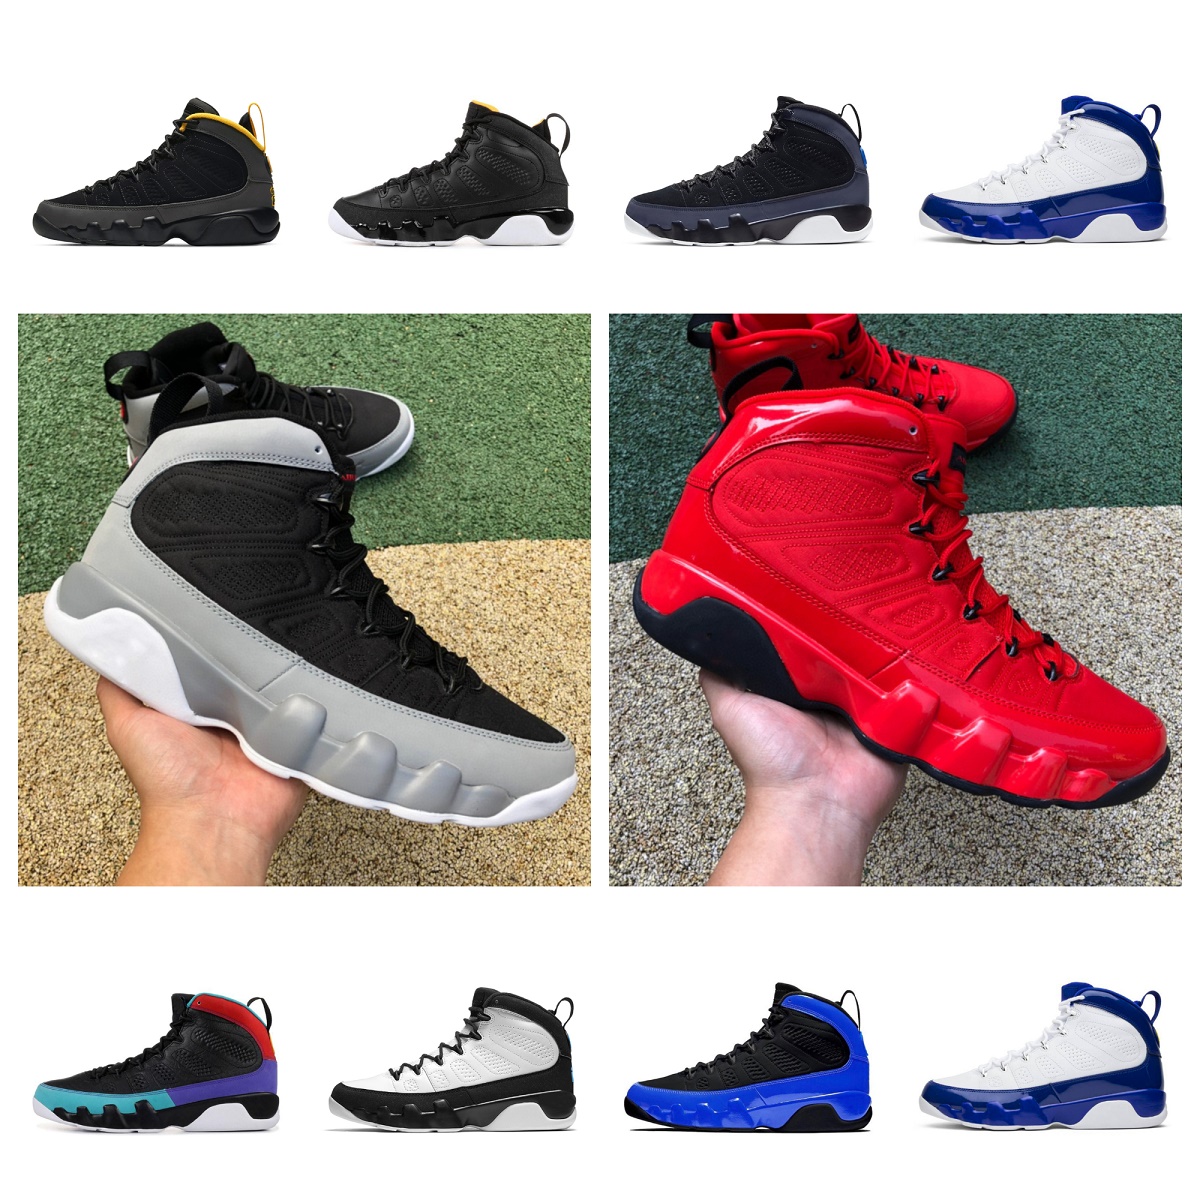 

Jumpman 9 OG Mens Basketball Shoes 9s Chile Red University Blue Gold Barons Particle Grey Bred Patent Space Jace Dark Charcoal Cool Grey Men Trainers Sports Sneakers, Bubble package bag